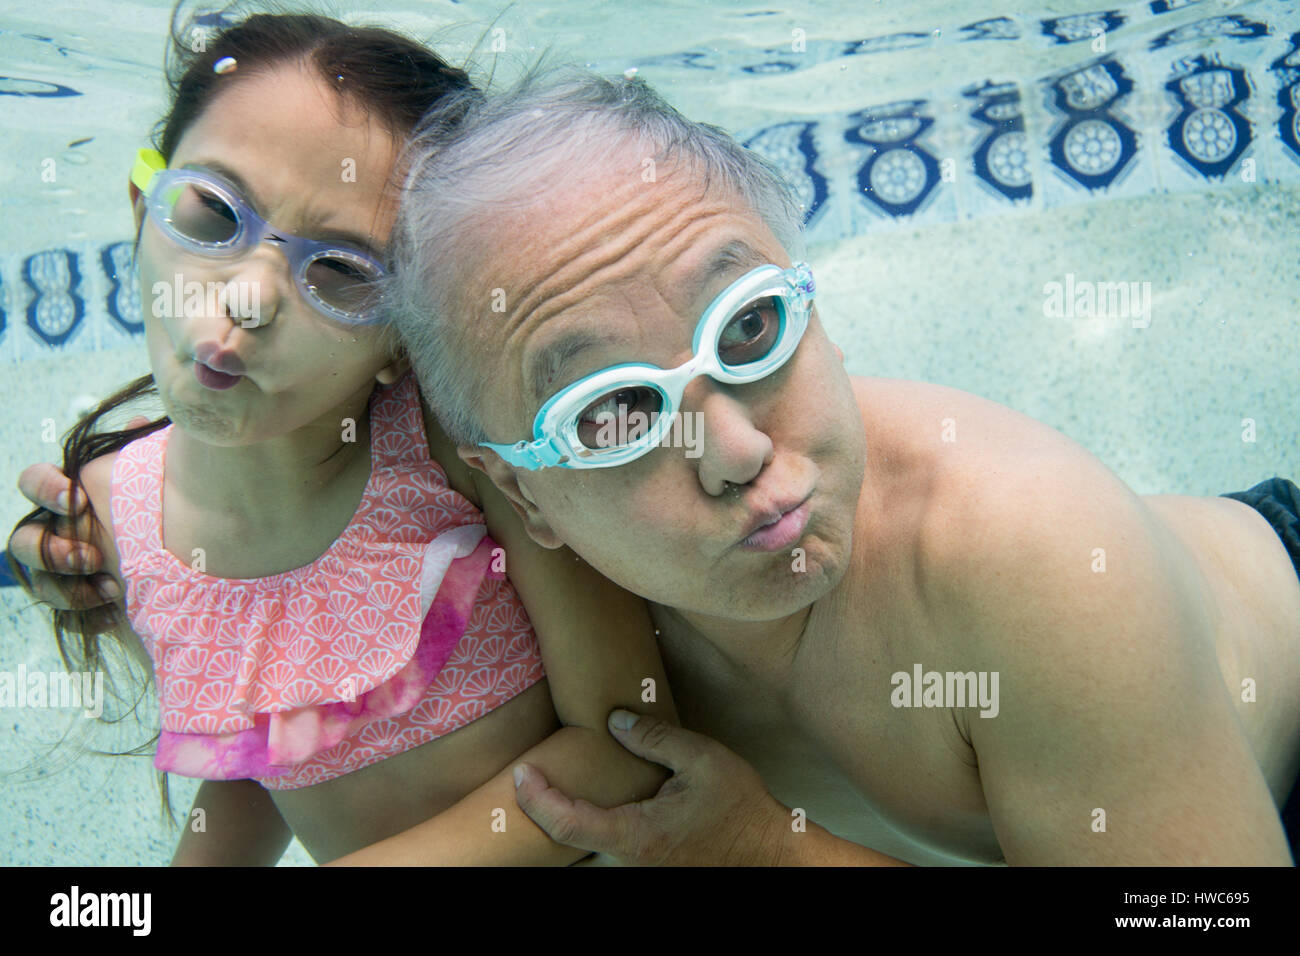 Senior underwater in a swimming pool with granddaughter Stock Photo